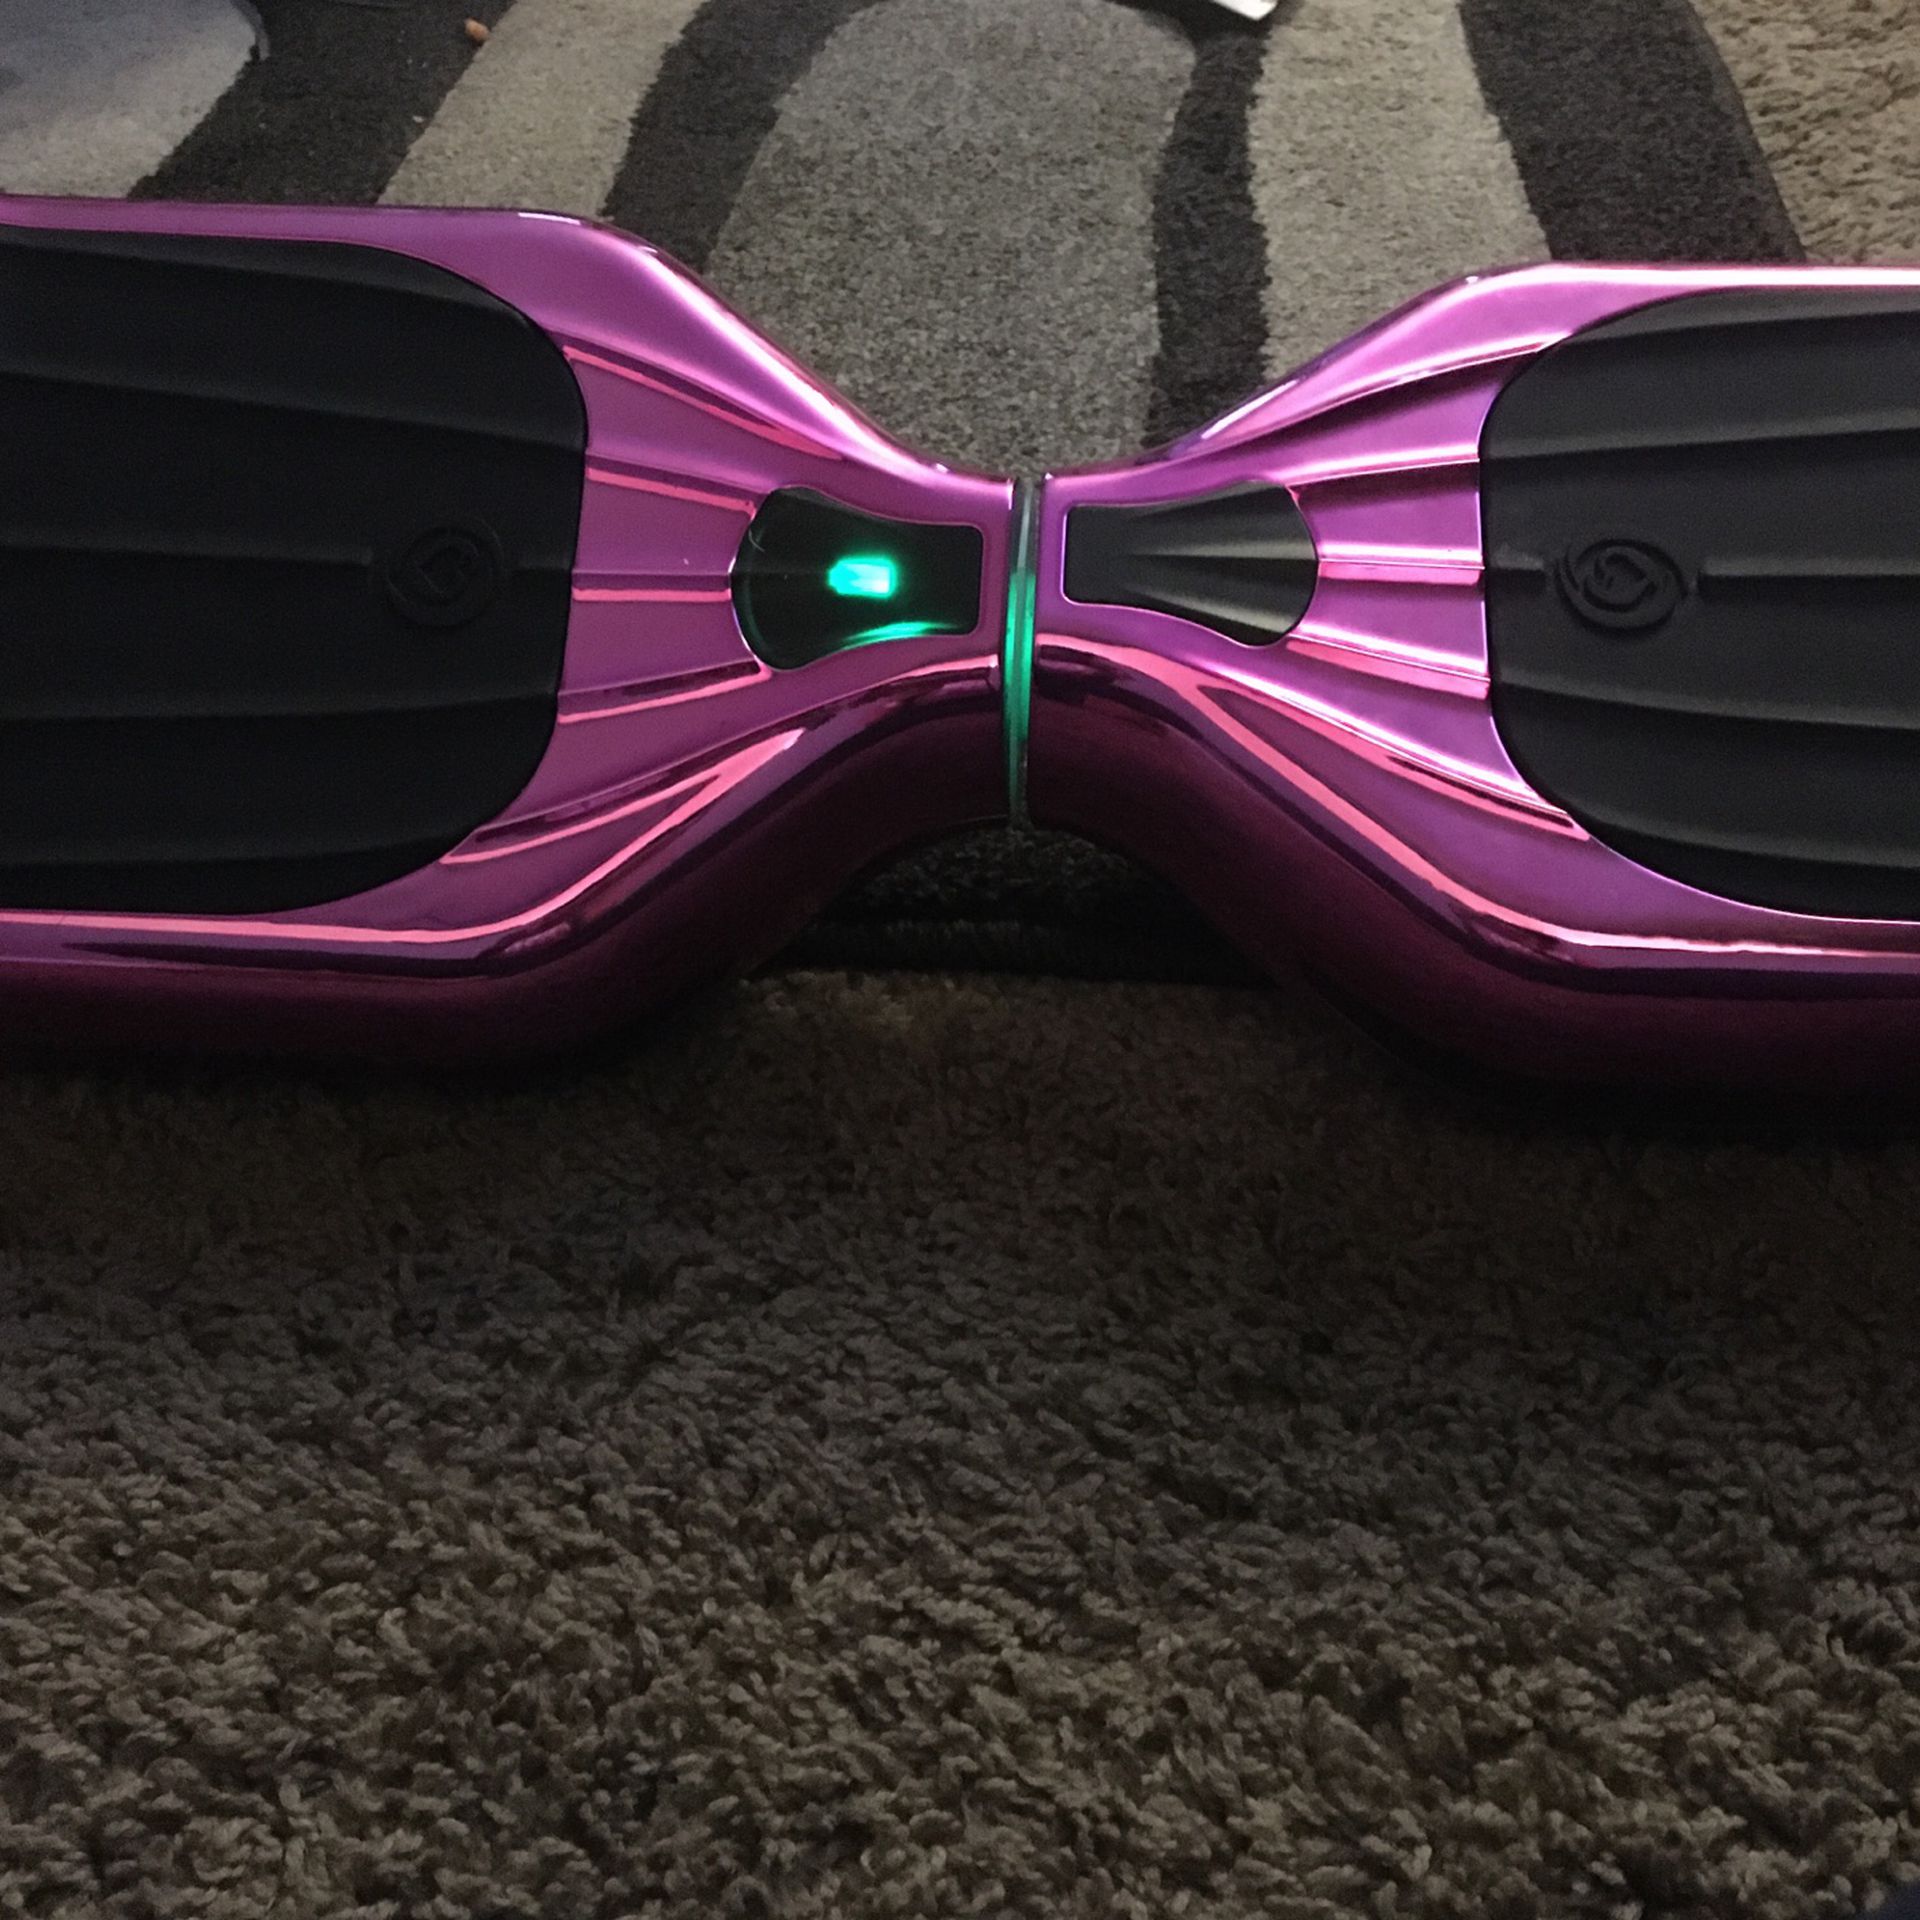 Hoverboard Used 5 -6 Times Works Great An A Metallic Pink Color